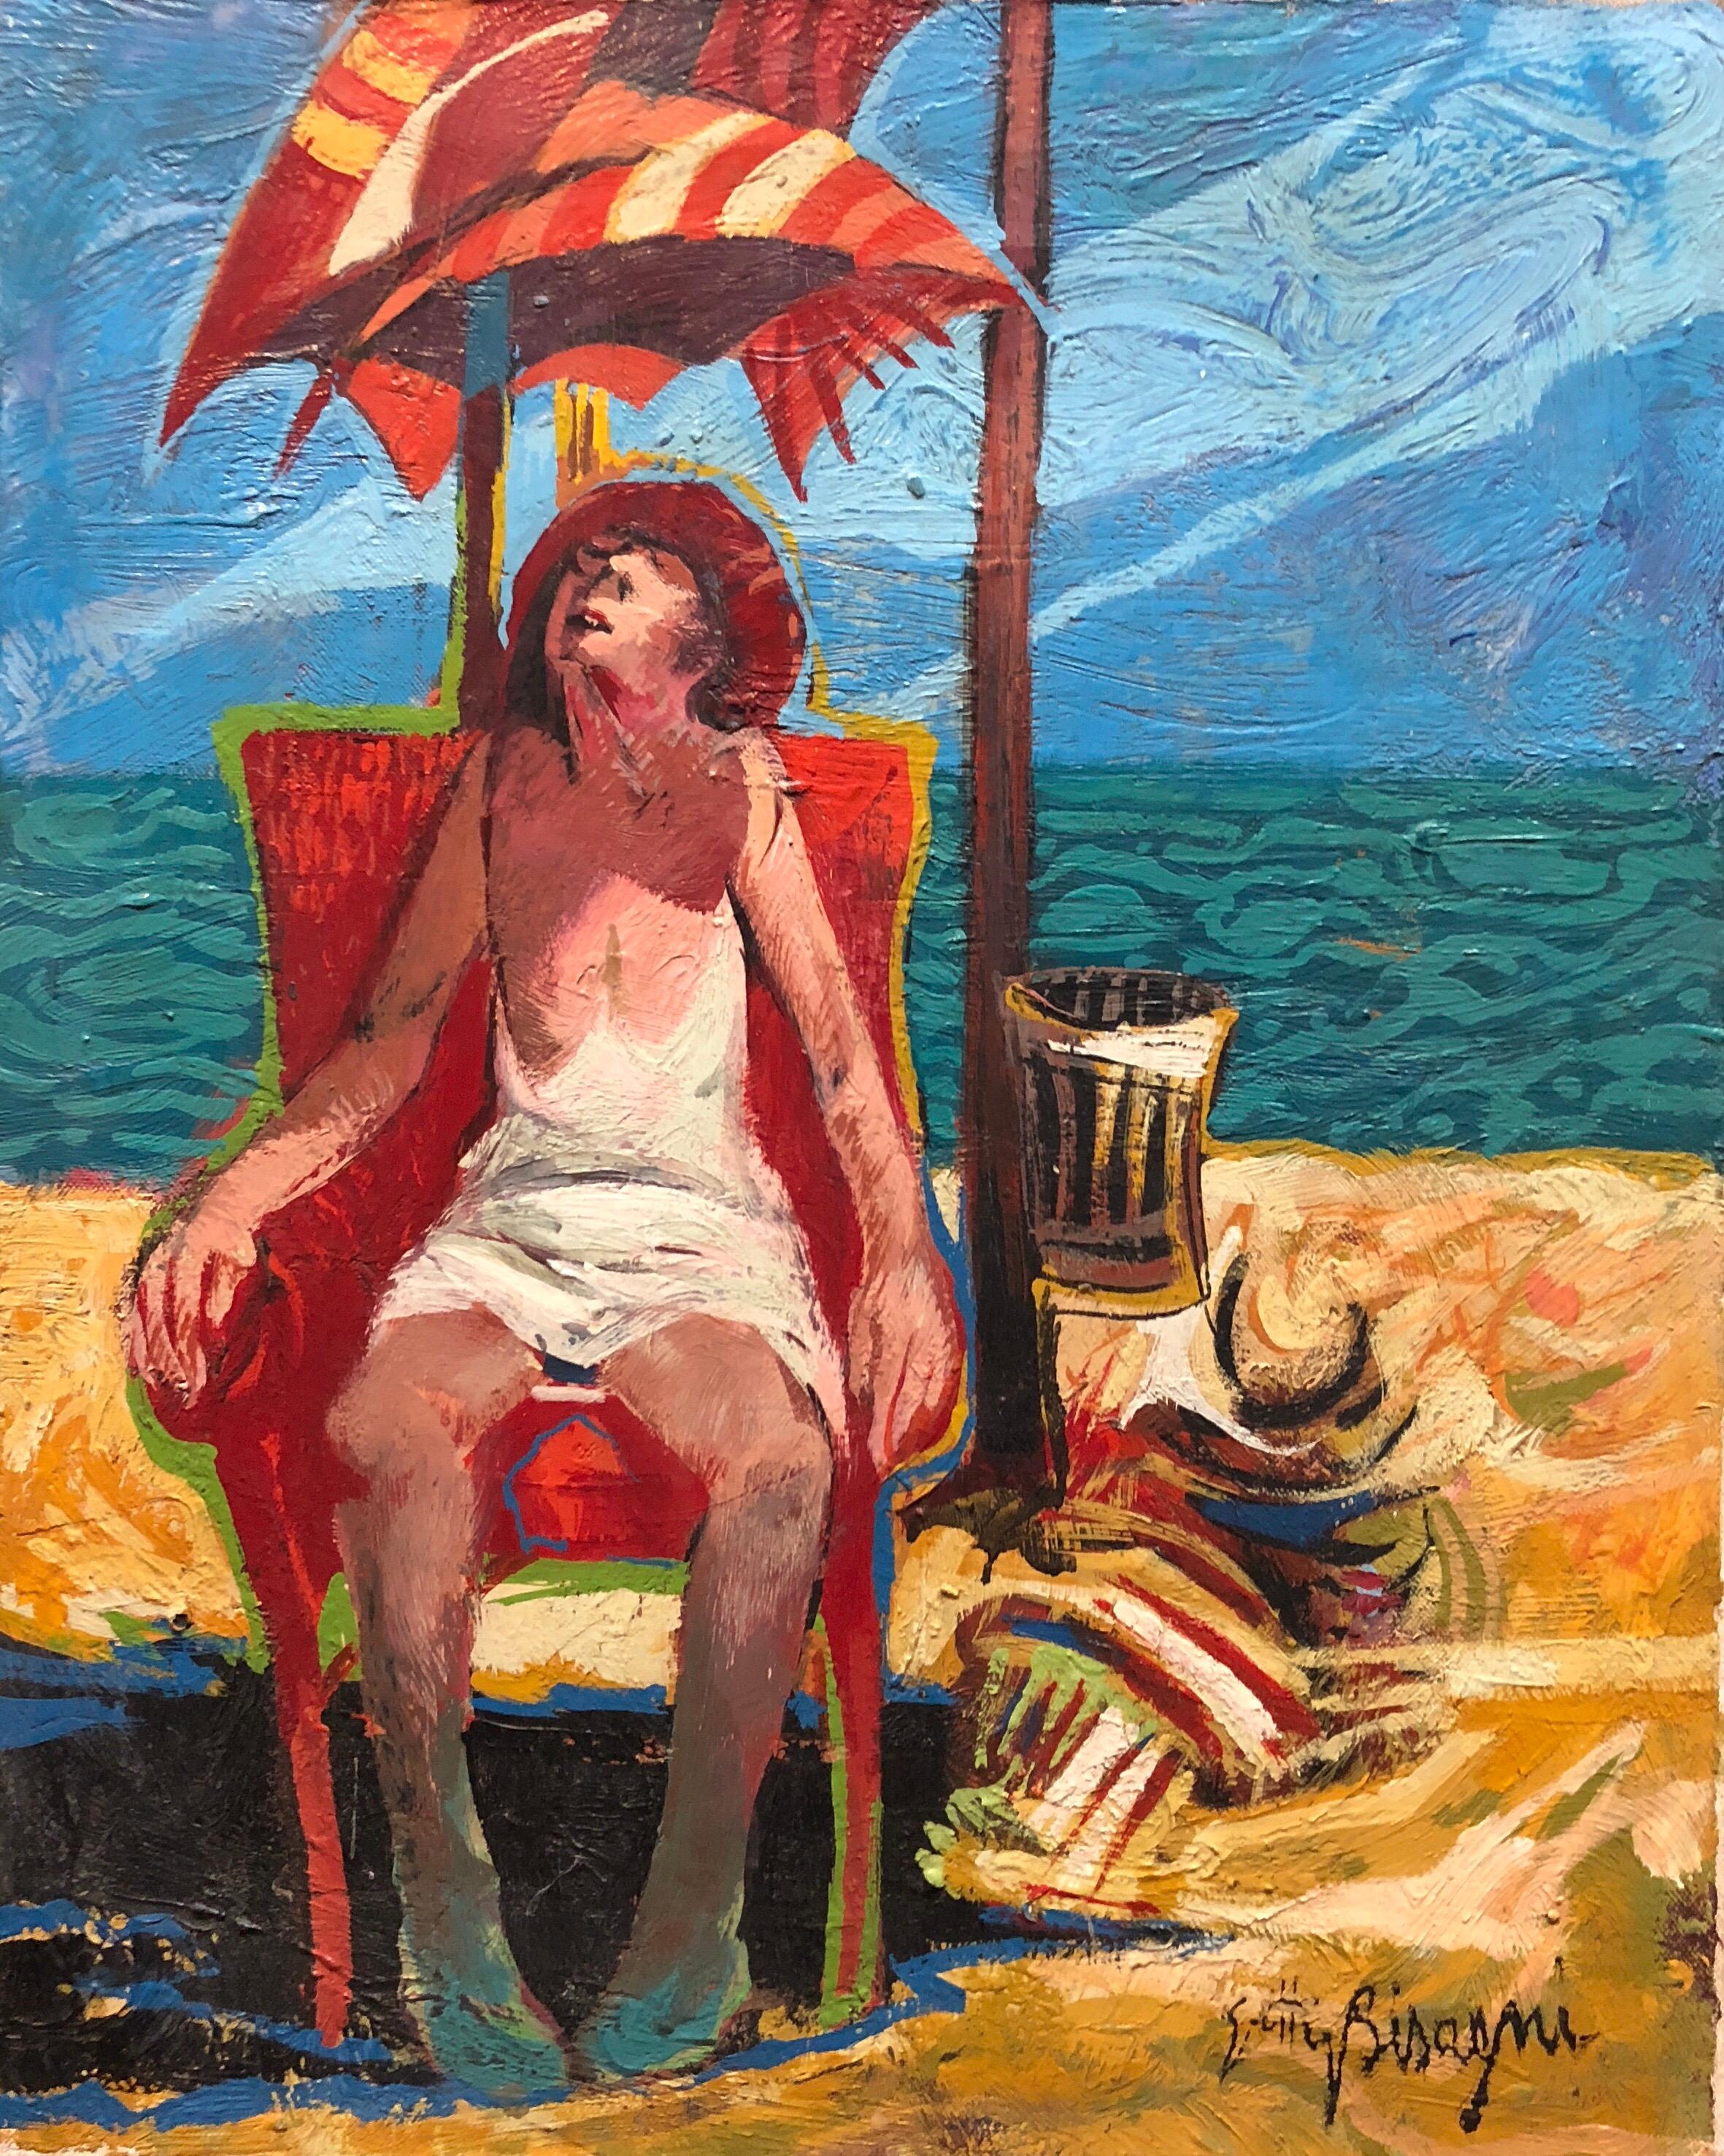 Getty Bisagni Figurative Painting - Woman in Chair Beach Scene Italian Modernist Oil Painting